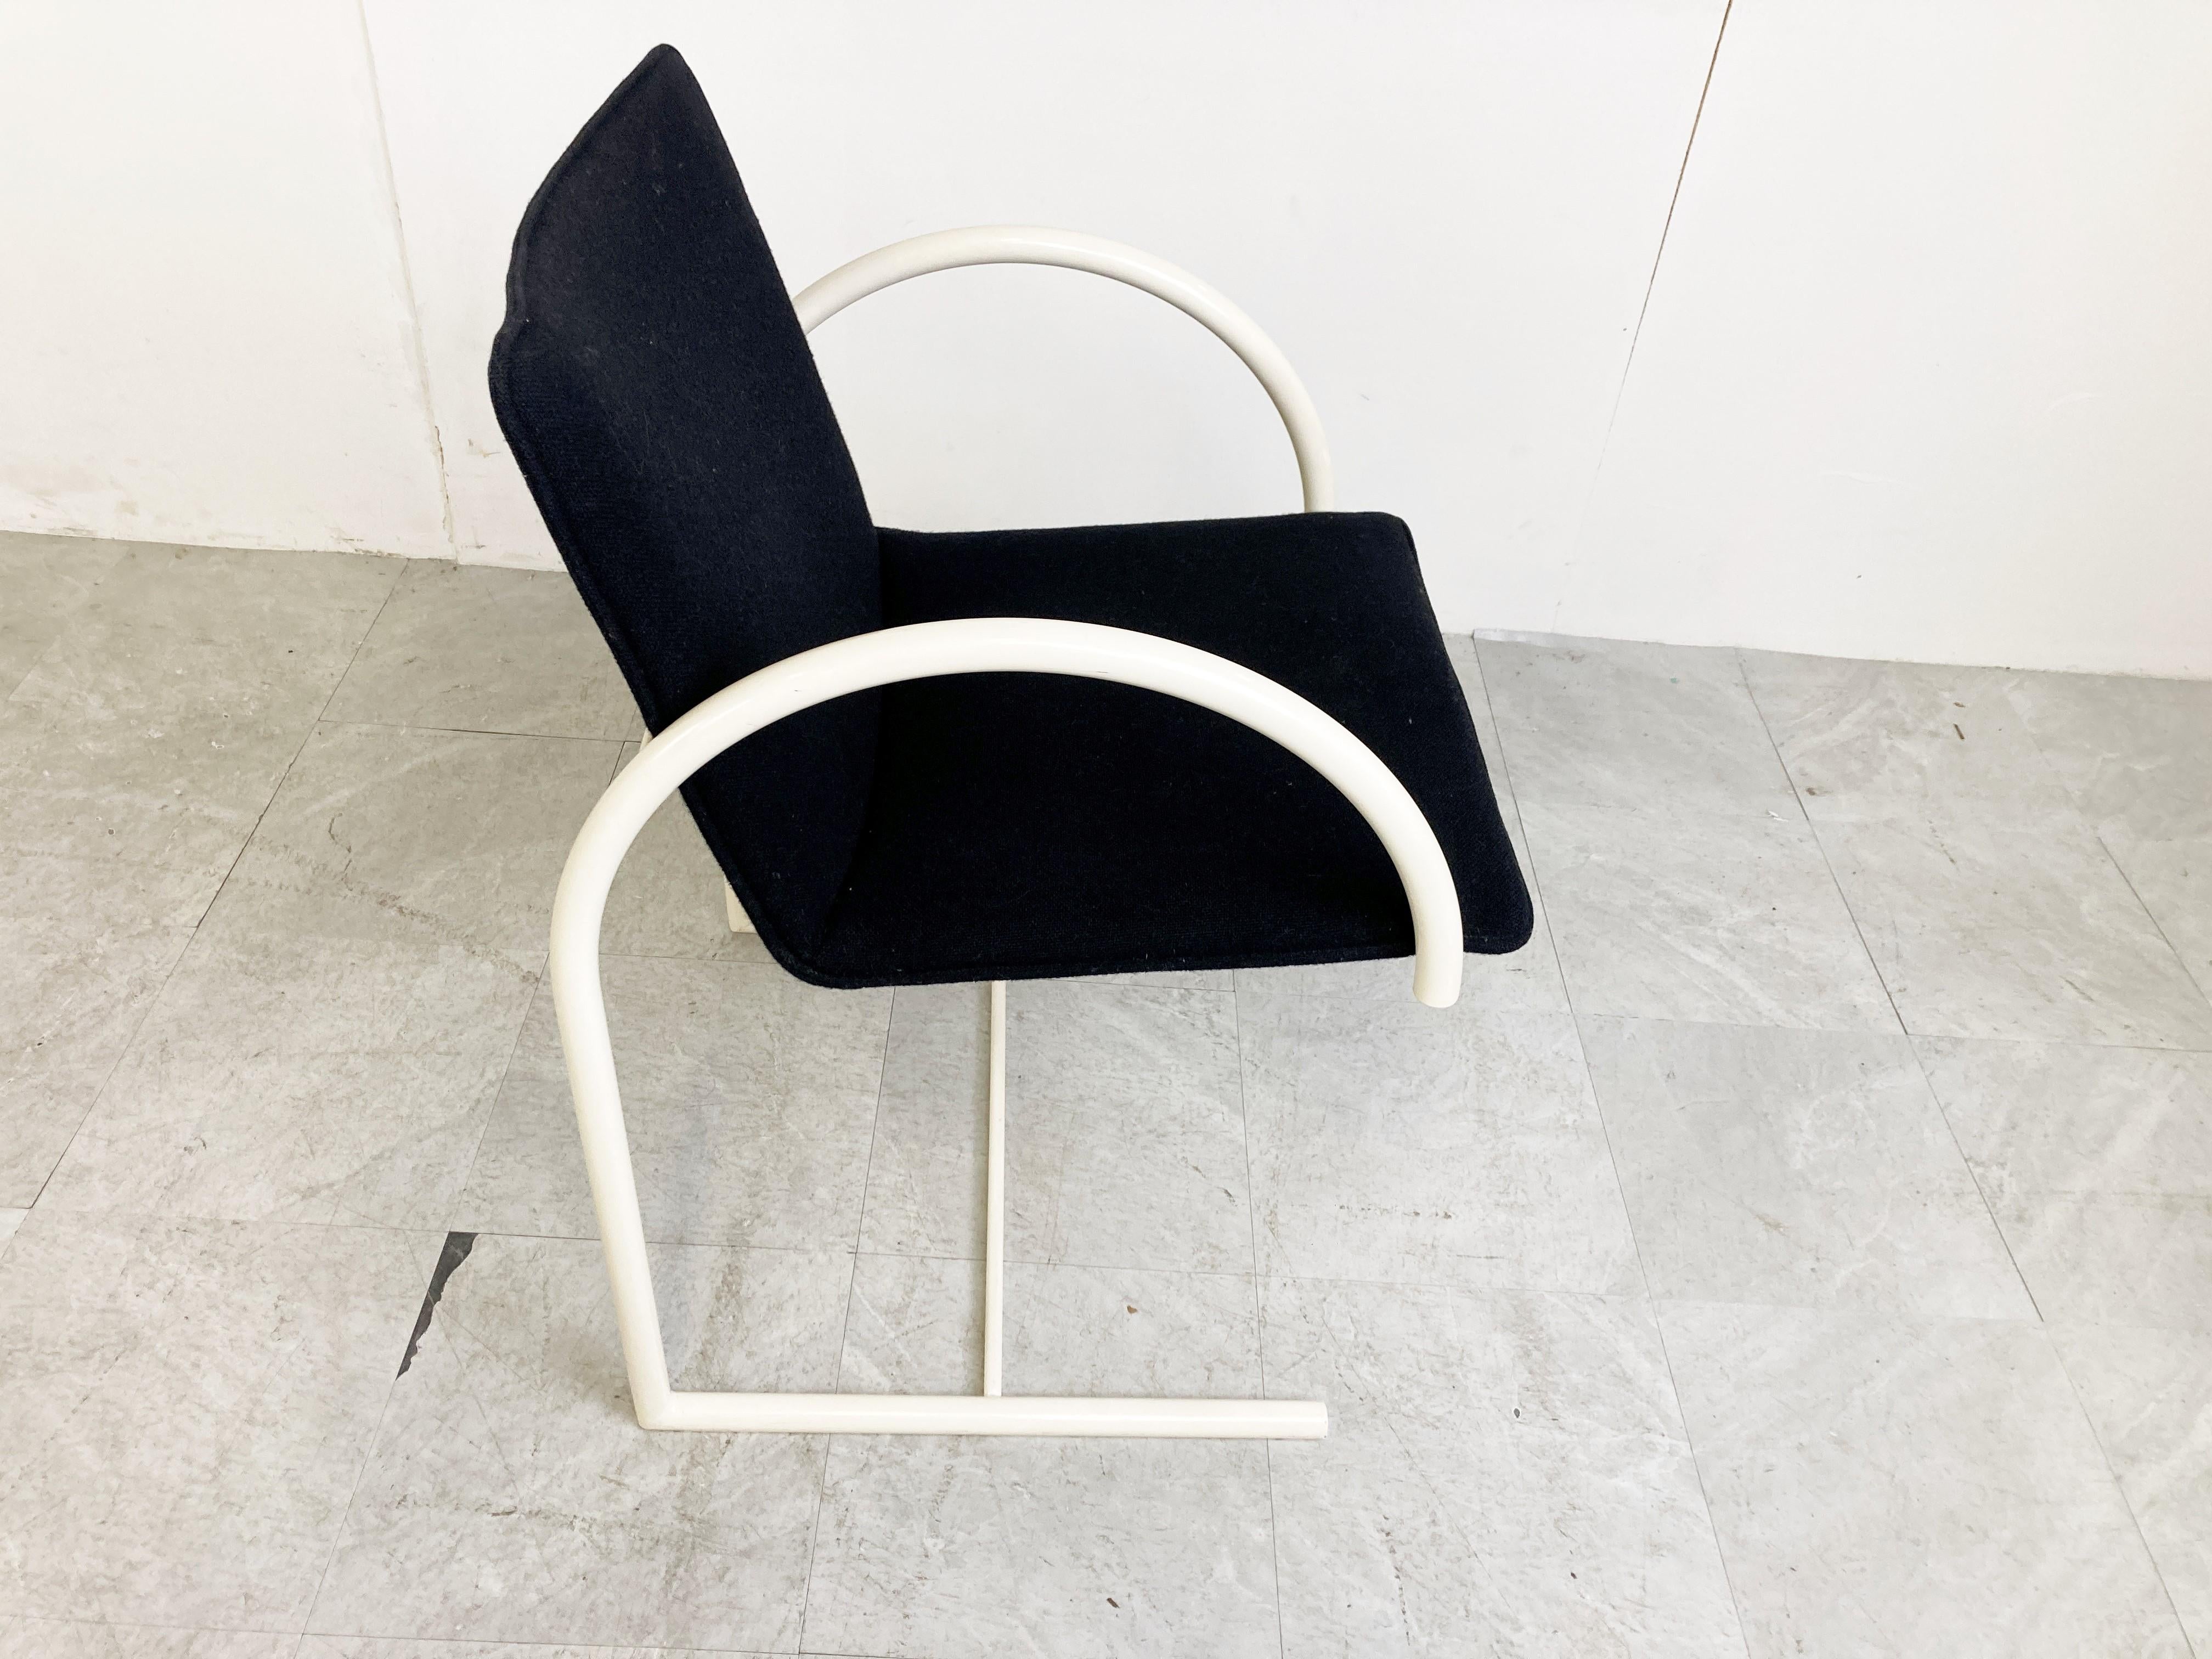 Post modern 'cirkel' dining chairs designed by Karel Boonzaaijer & Pierre Mazairac for Metaform.

Made out white lacquered metal tubular frames and black fabric.

Attractive, timeless design 

Good condition

1980s -